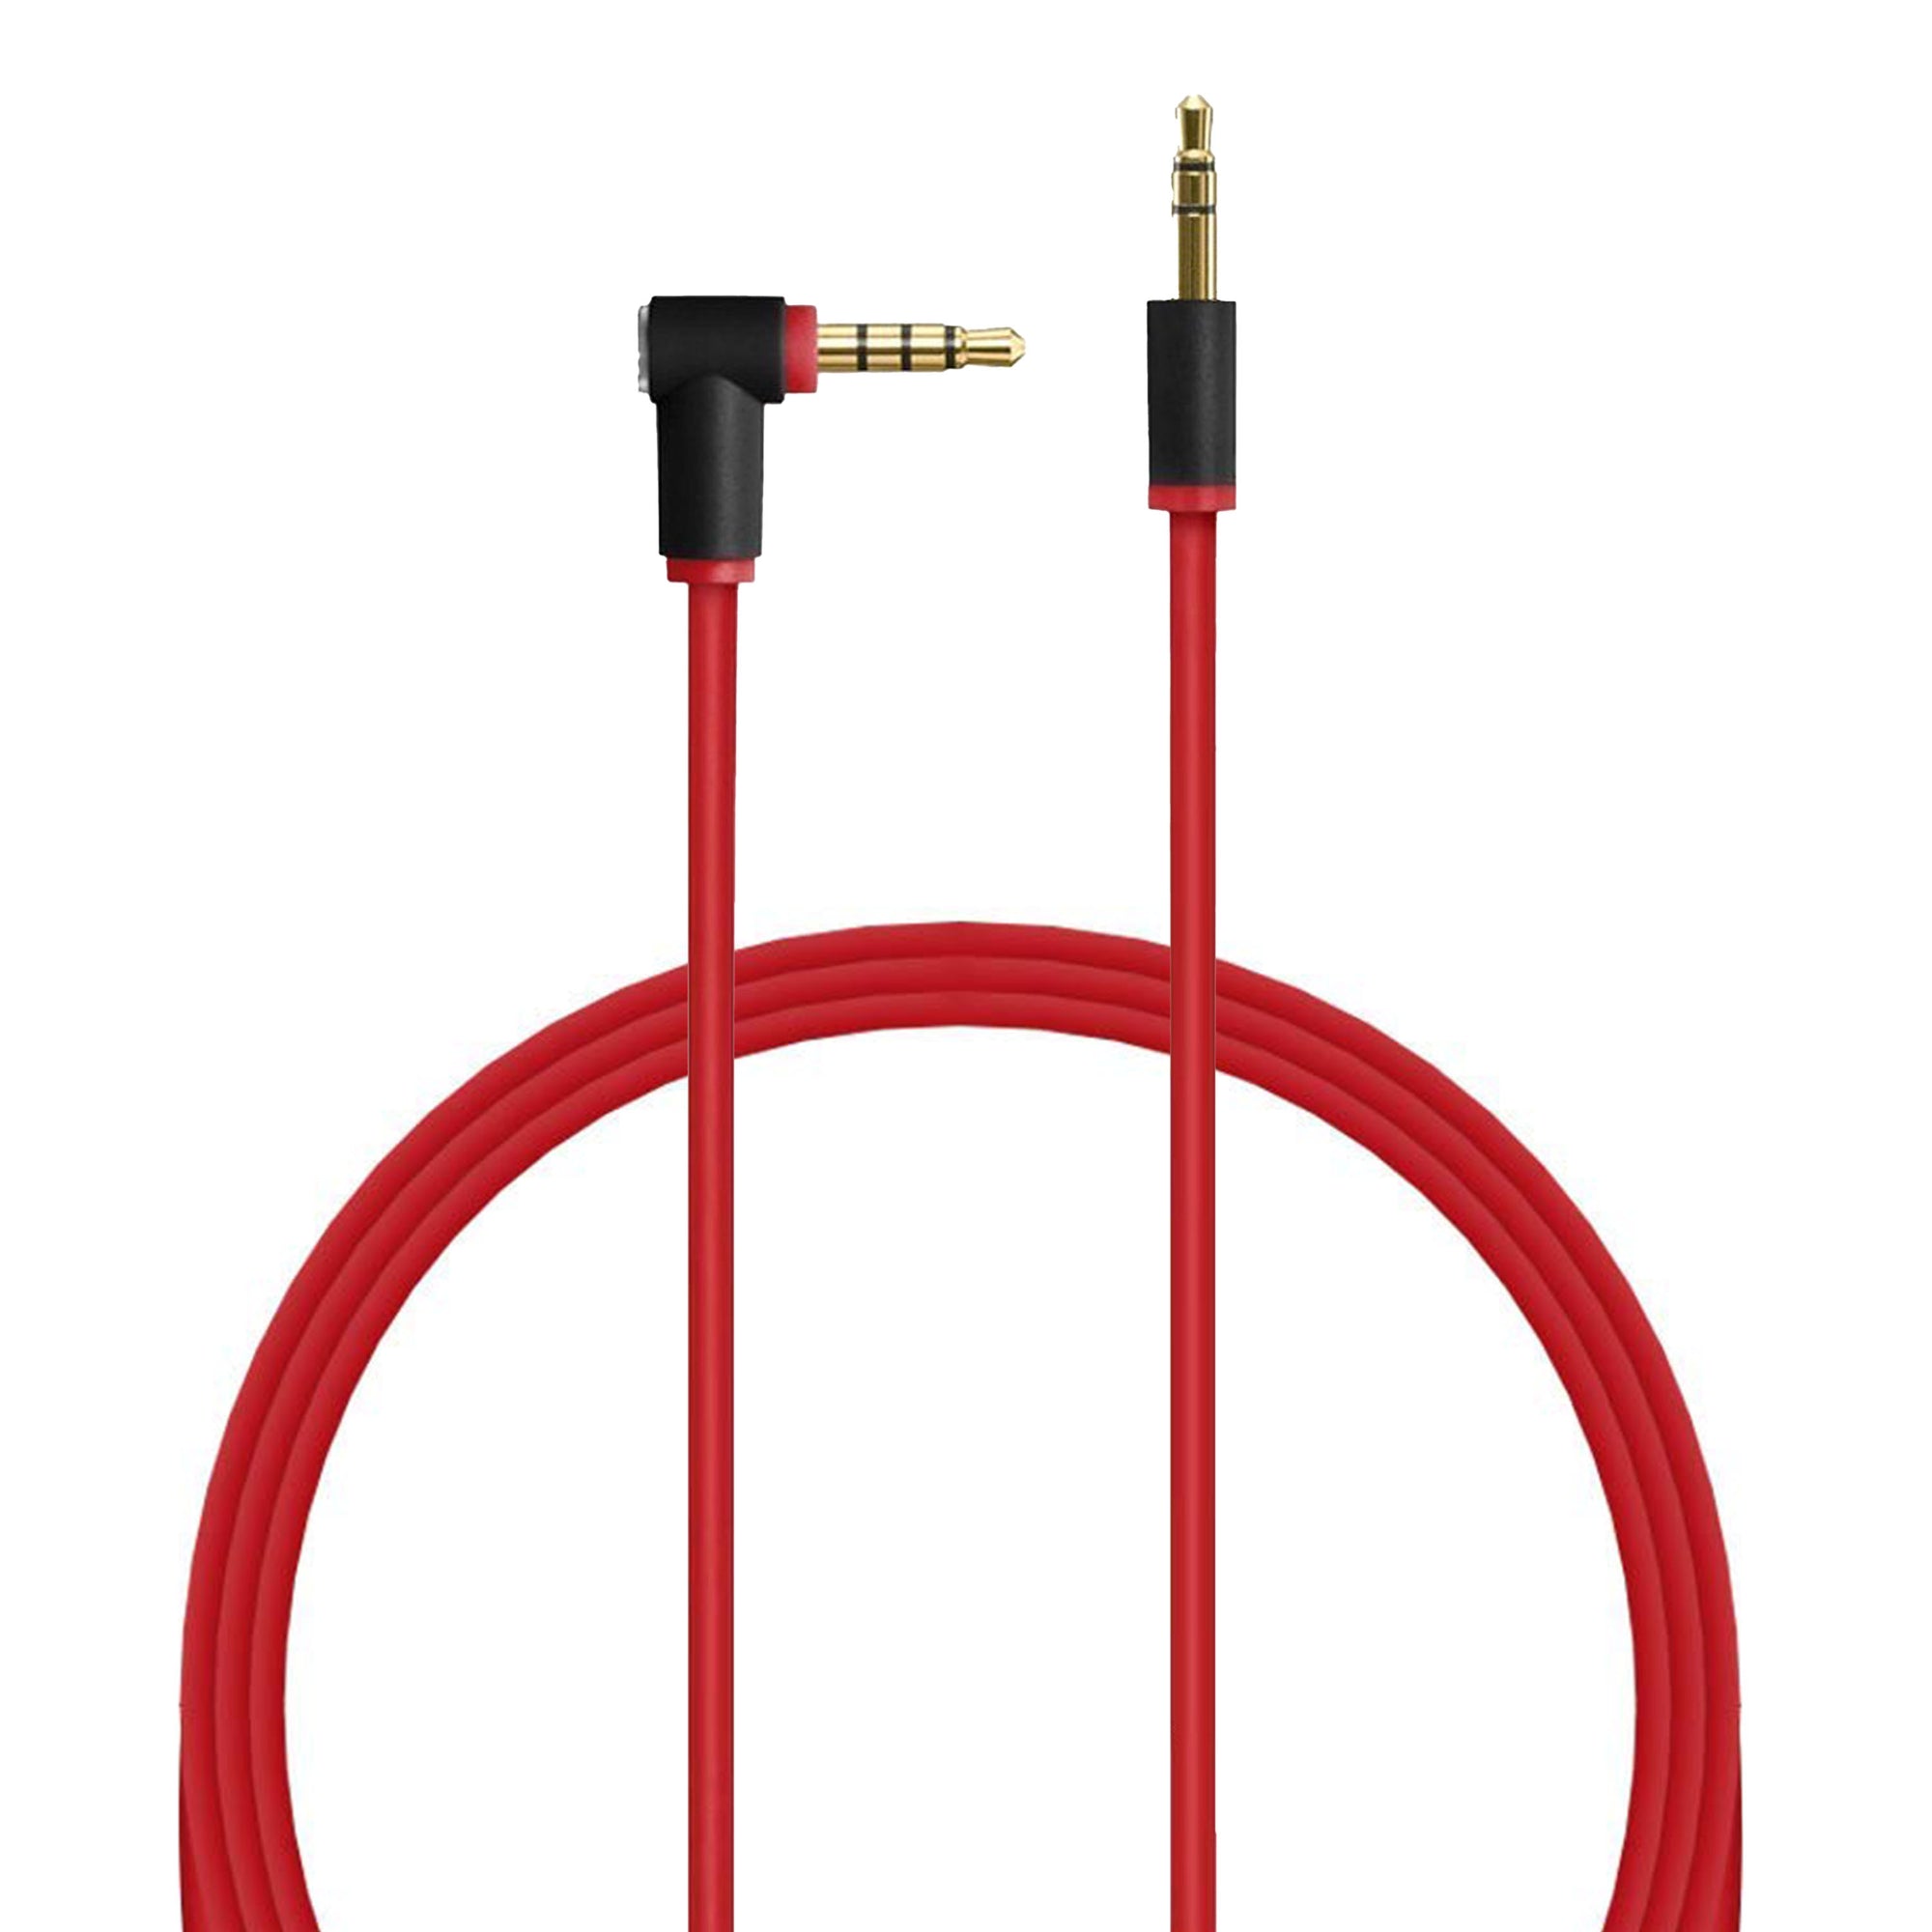 Replacement Cable for Beats Solo 2.0 & 3.0 Headphones - 1.5M / 59”